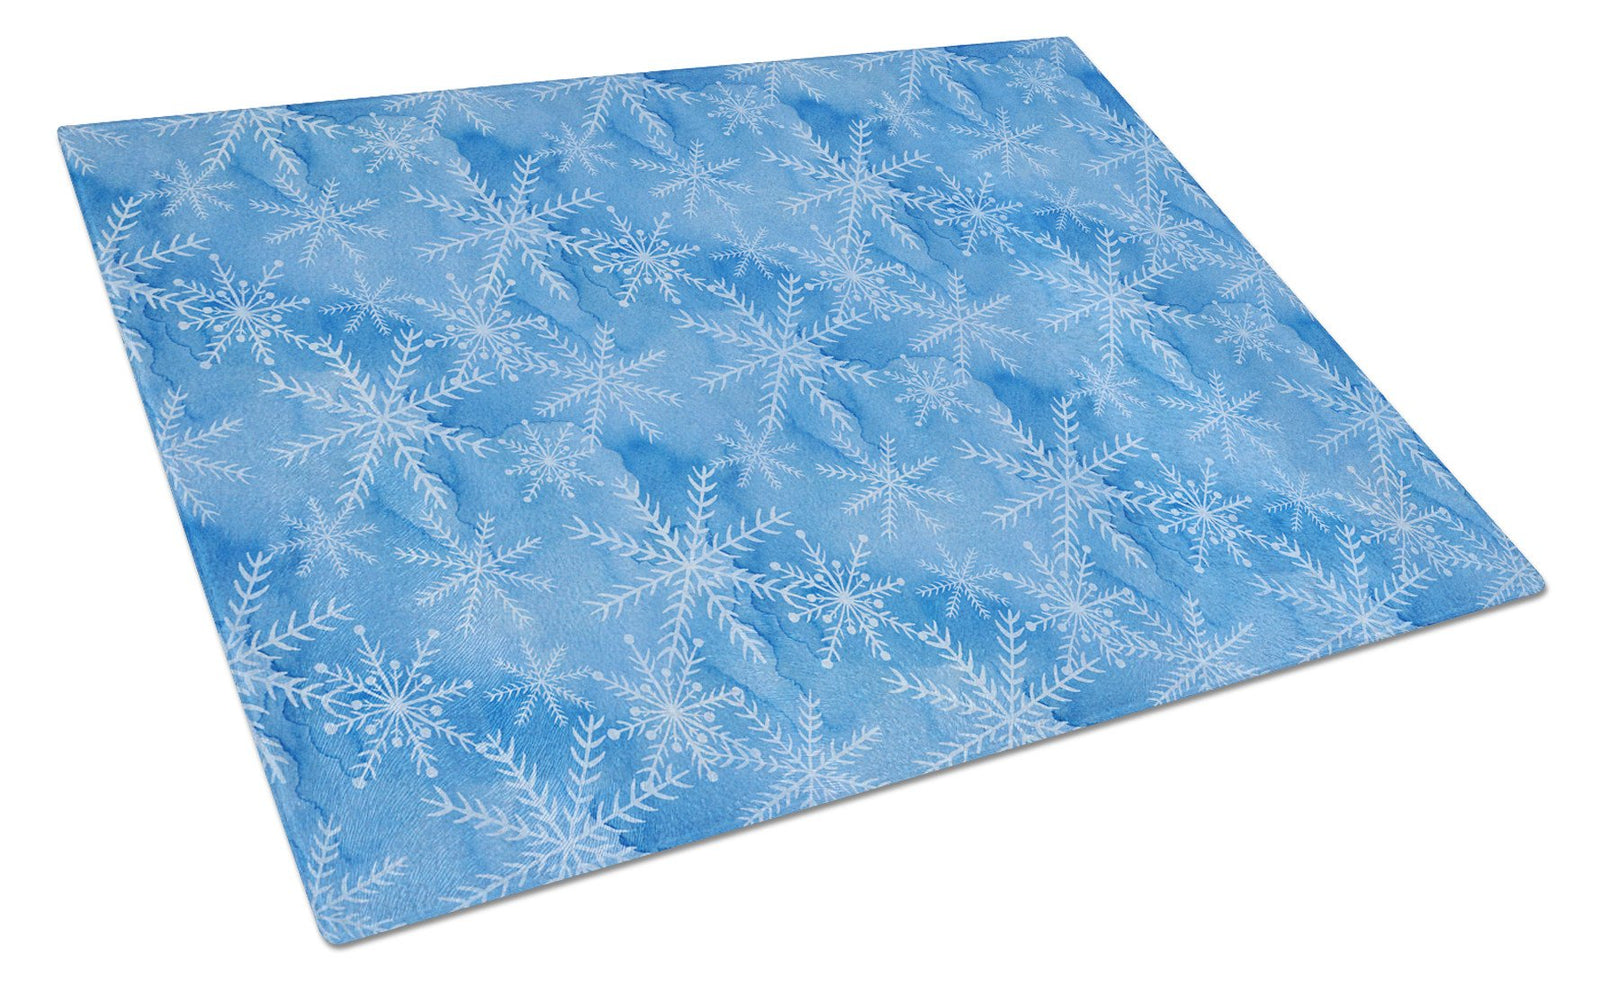 Watercolor Dark Blue Winter Snowflakes Glass Cutting Board Large BB7576LCB by Caroline's Treasures